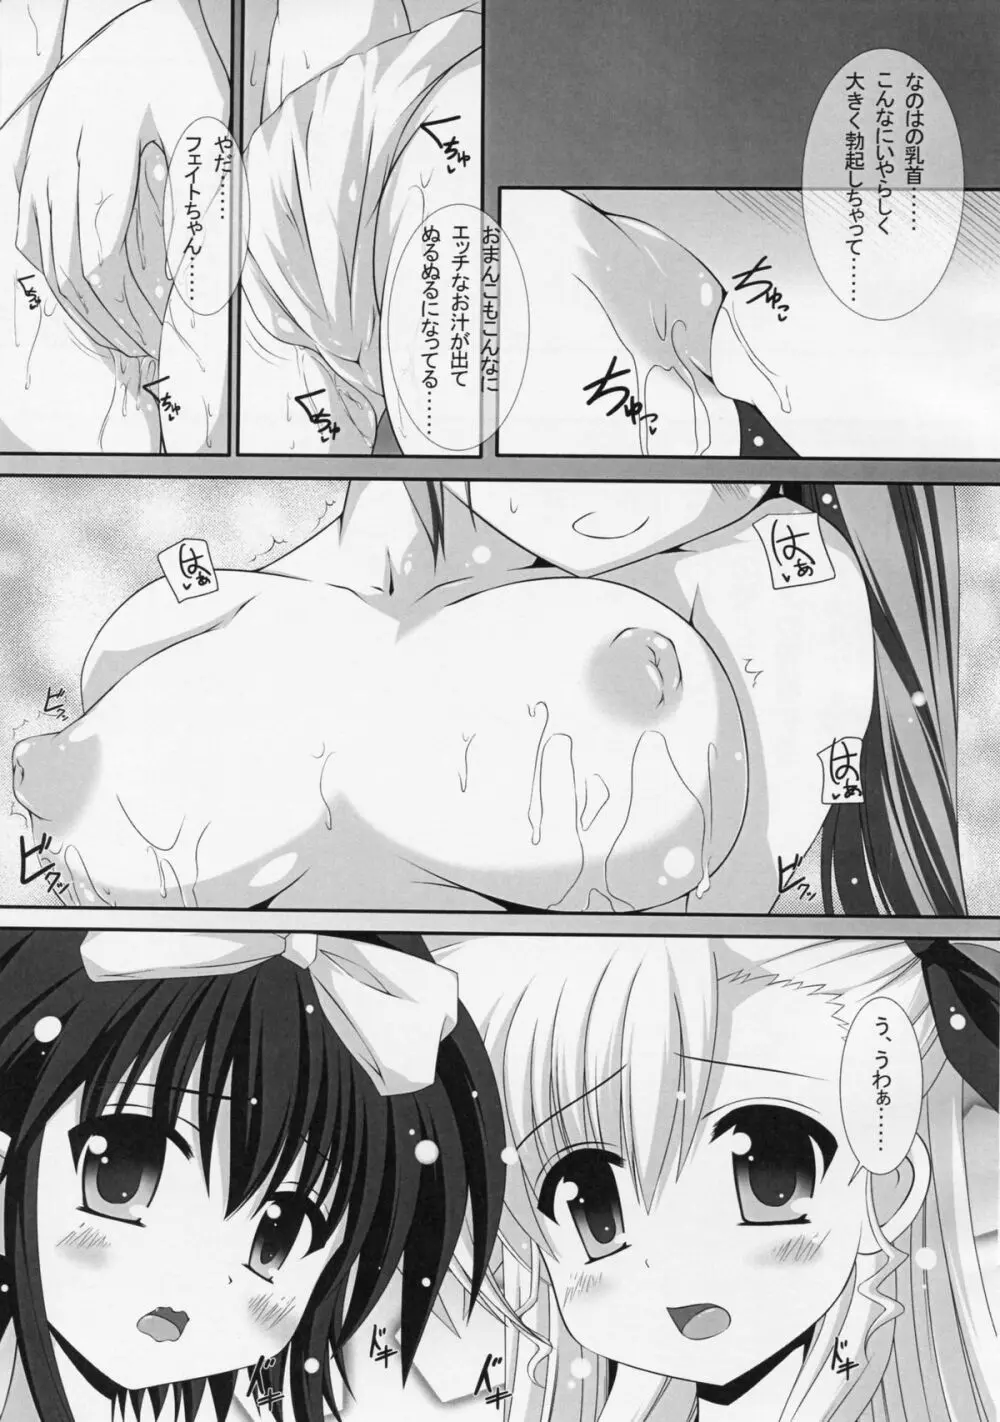 Sexual Drive #02 Page.4